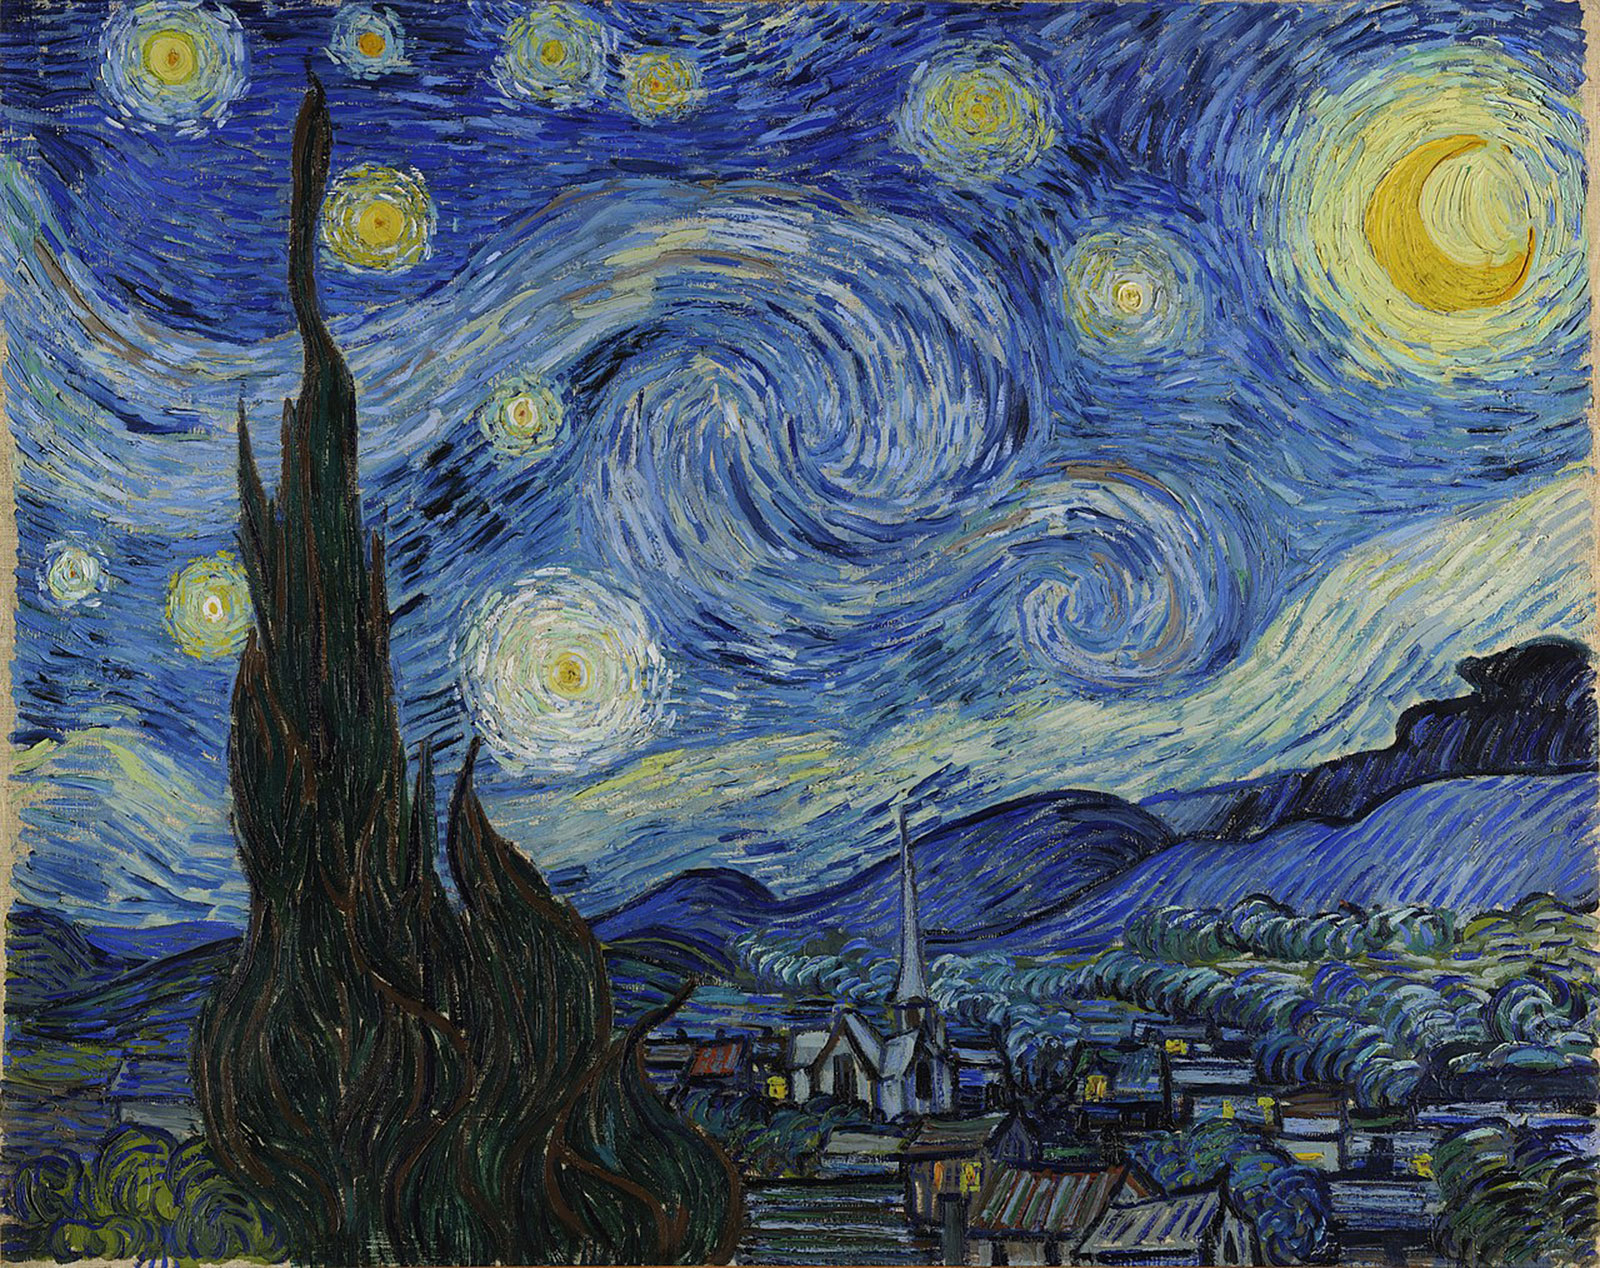 How Well-Rounded Is Your Knowledge? Take This General Knowledge Quiz to Find Out! The Starry Night Painting By Vincent Van Gogh